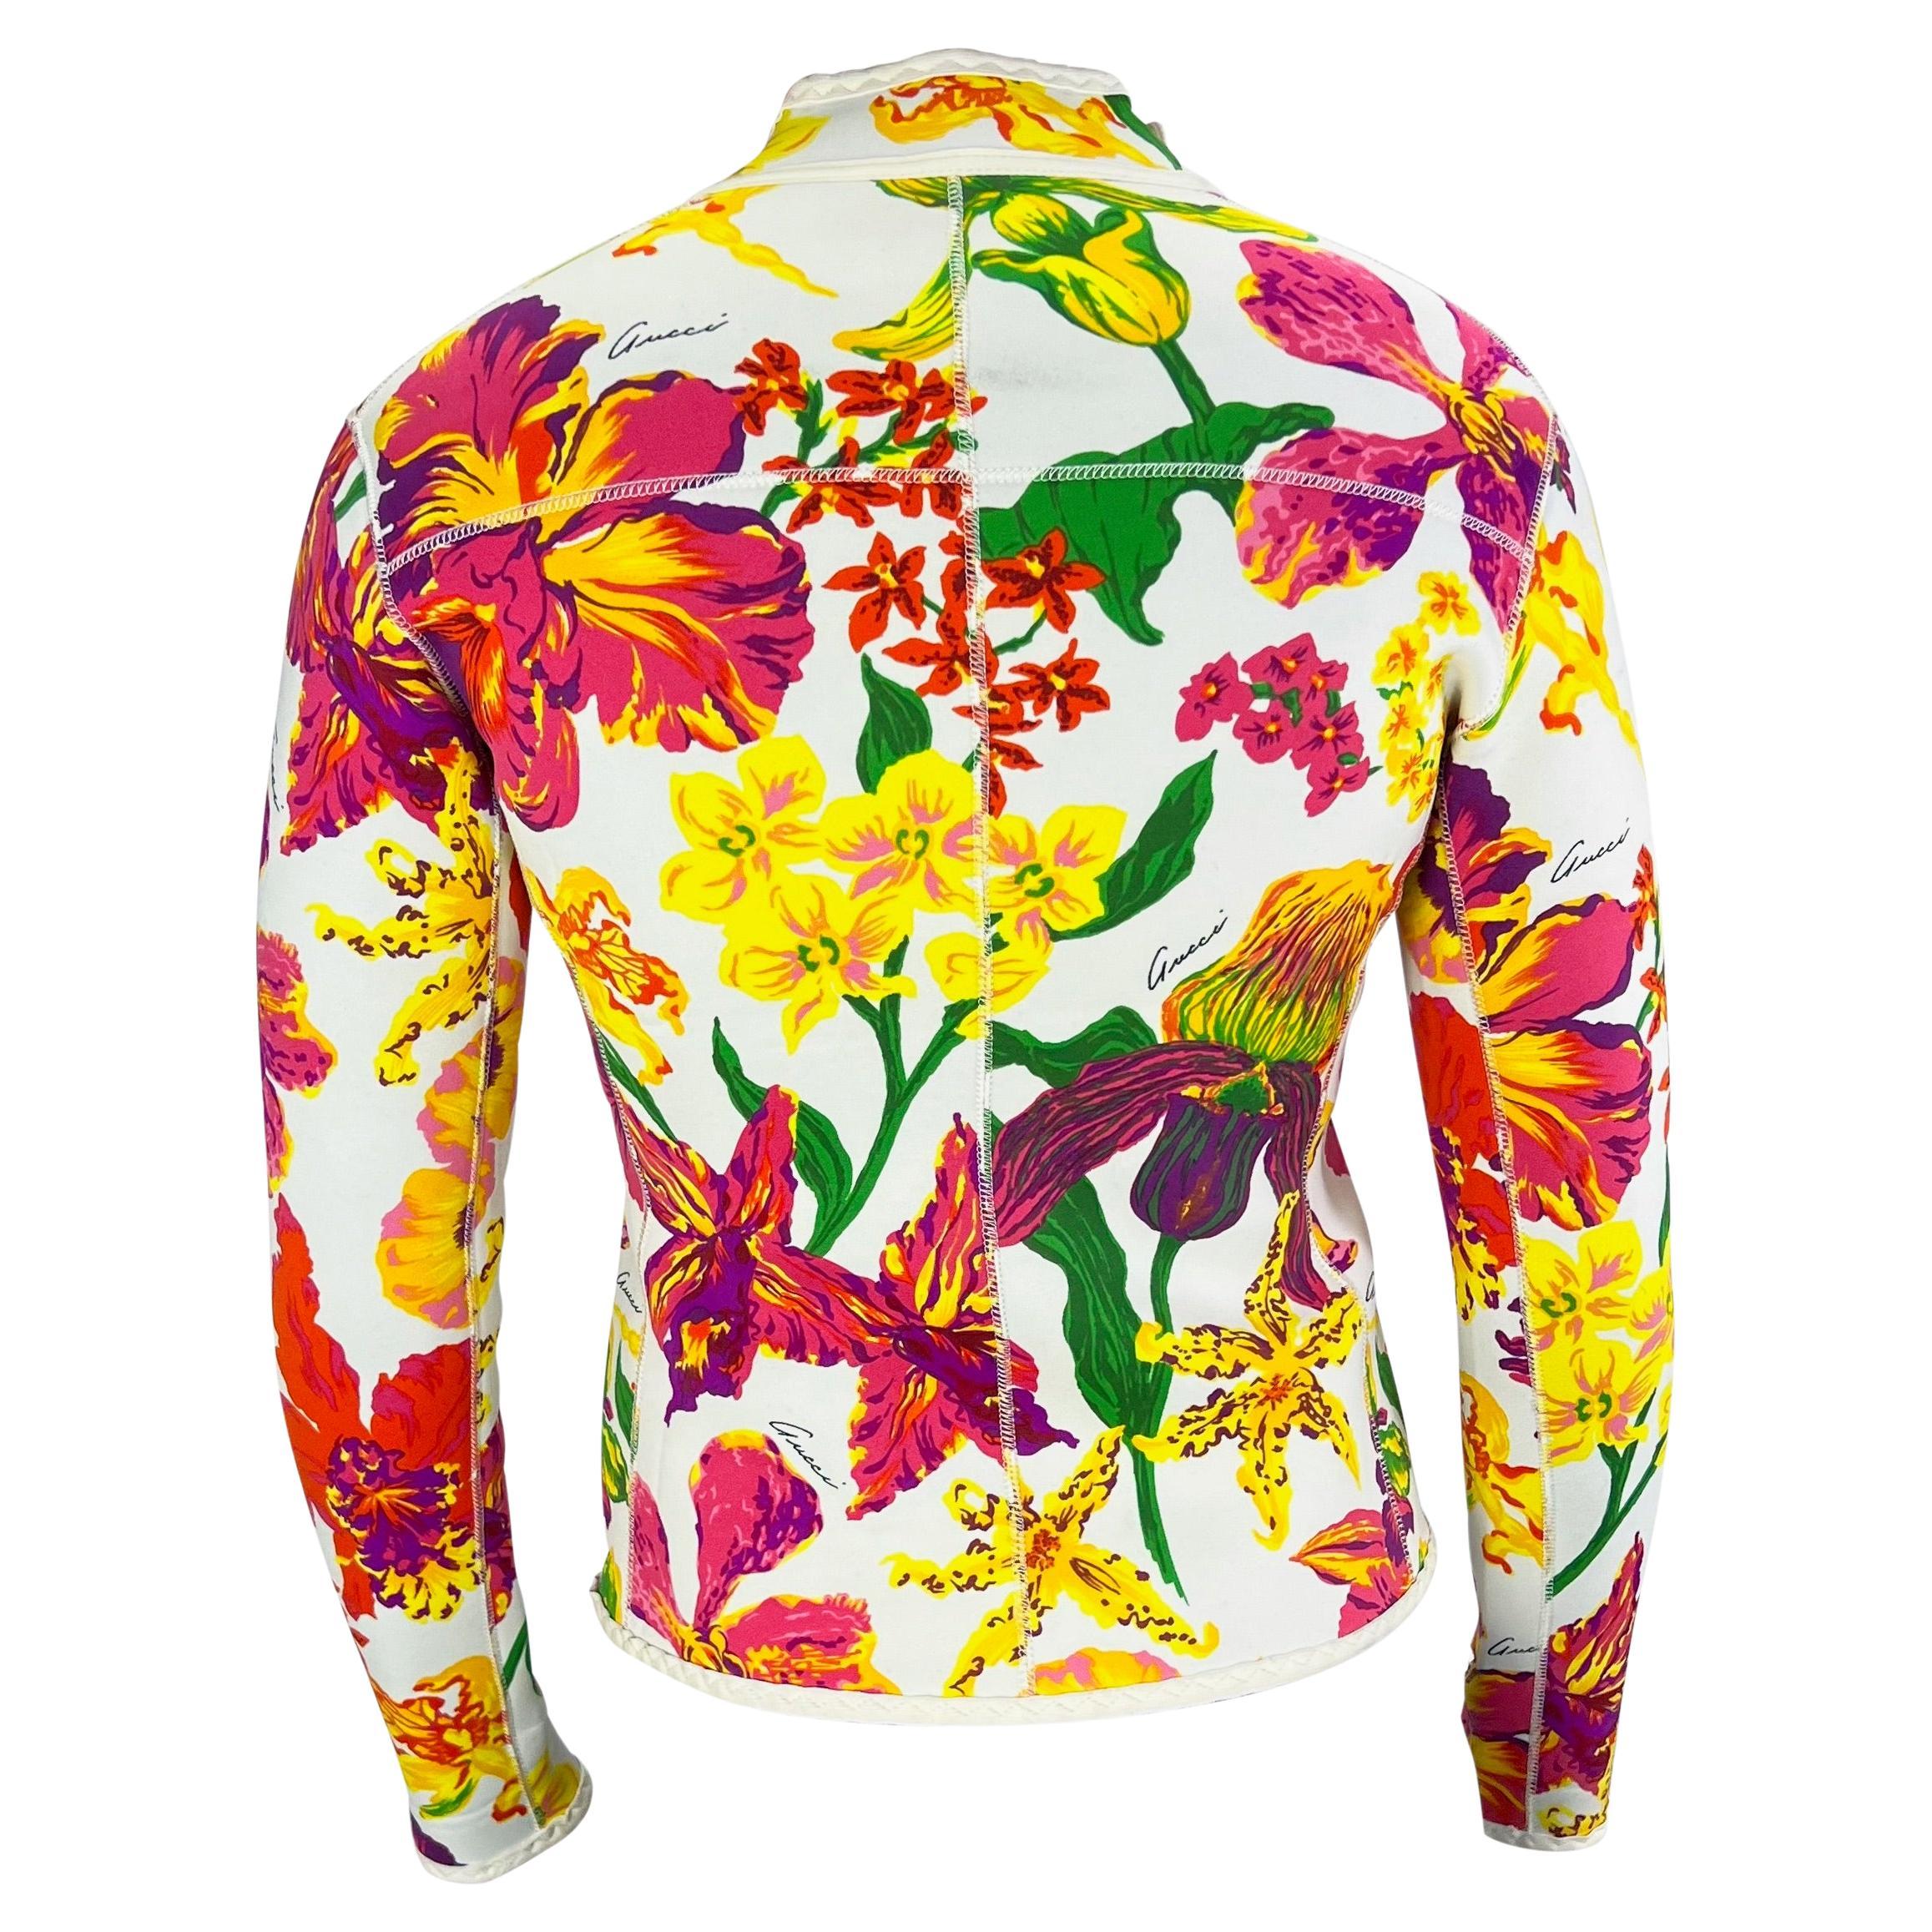 S/S 1999 Gucci by Tom Ford Men's Runway Ad White Floral Neoprene Scuba Jacket For Sale 3